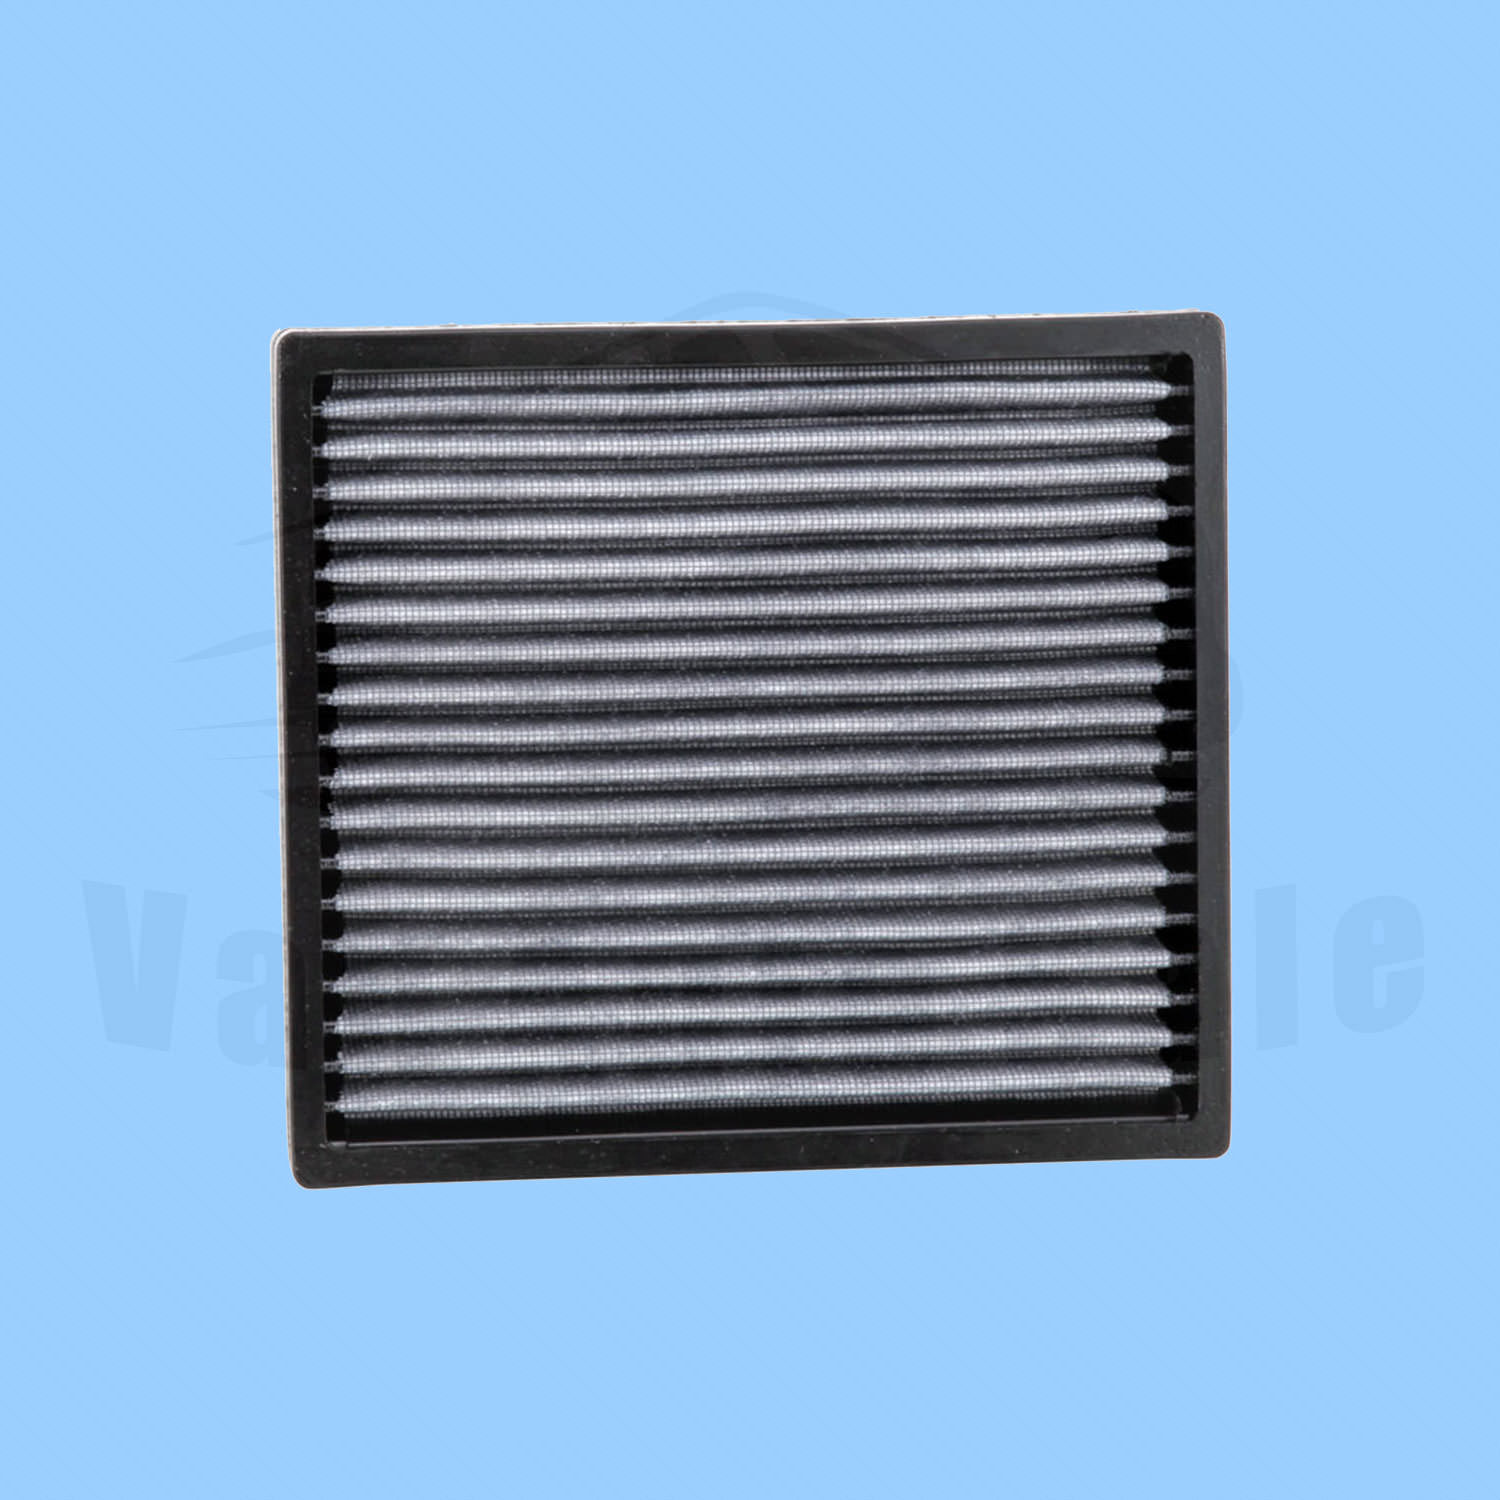 Cabin Air Filter K&N for Toyota Tundra 2007-2020 | eBay Cabin Air Filter For 2007 Toyota Tundra